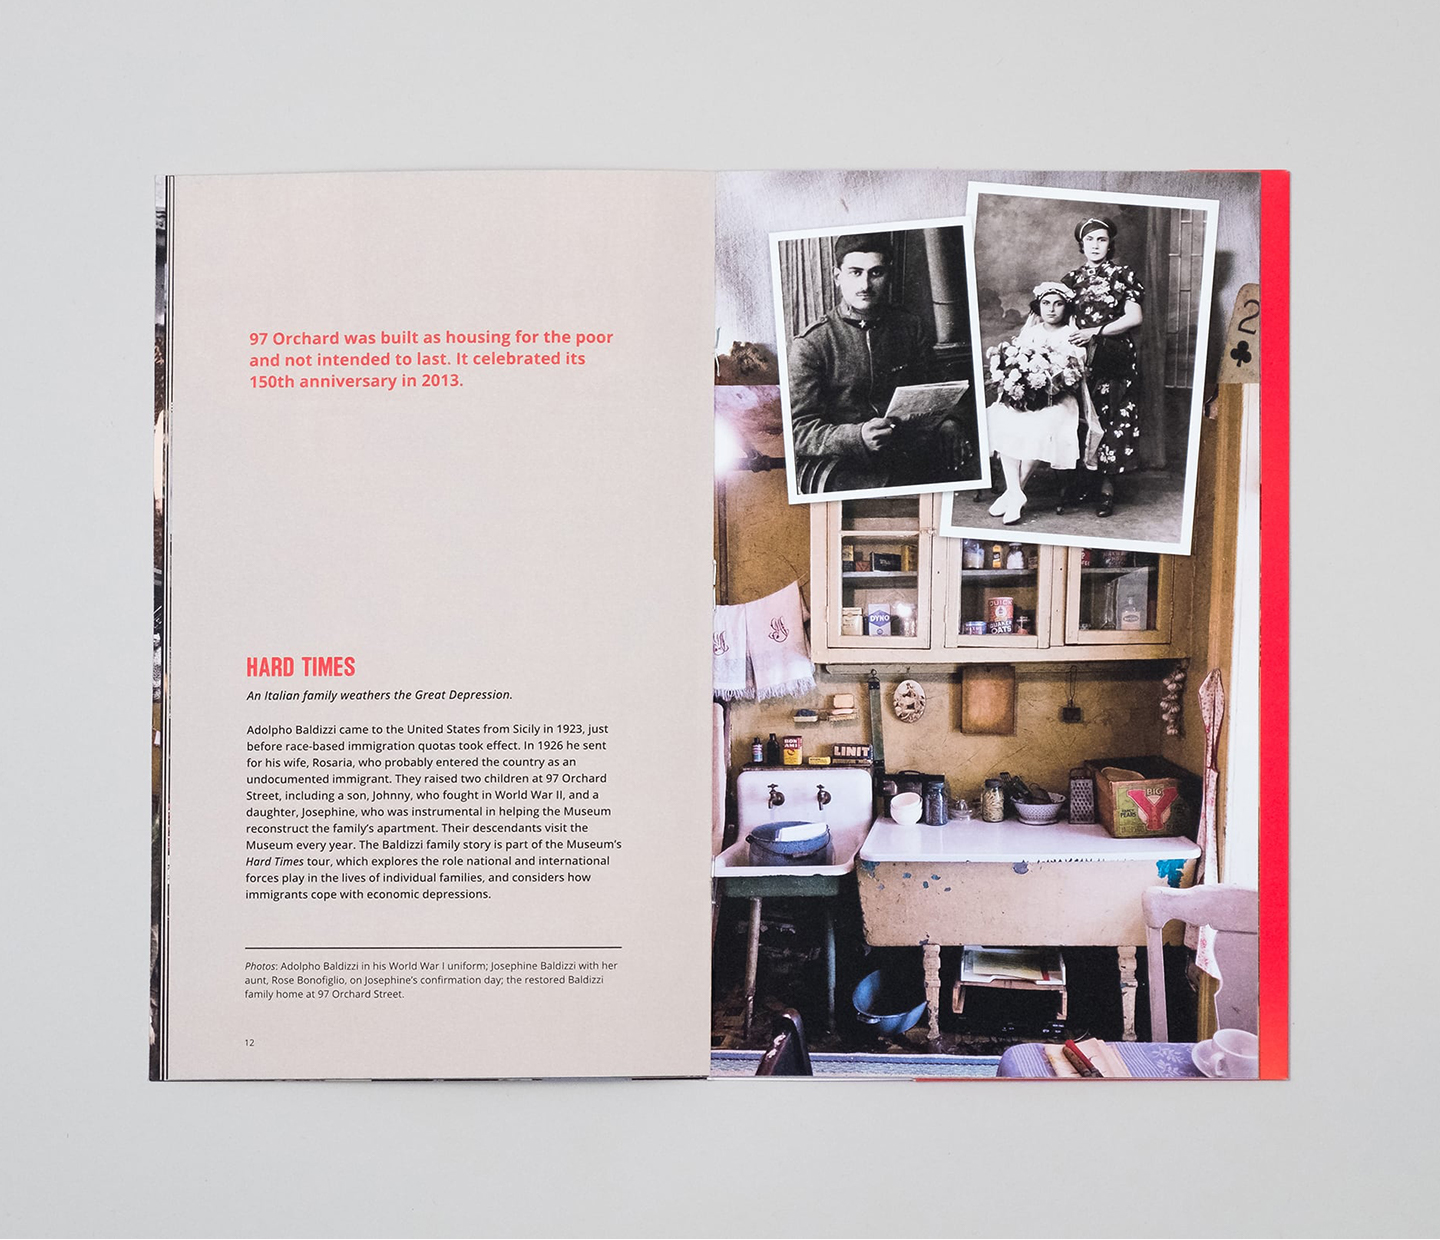 Interior spread with a photograph of a tenement resident's kitchen and details on the Hard Times tour